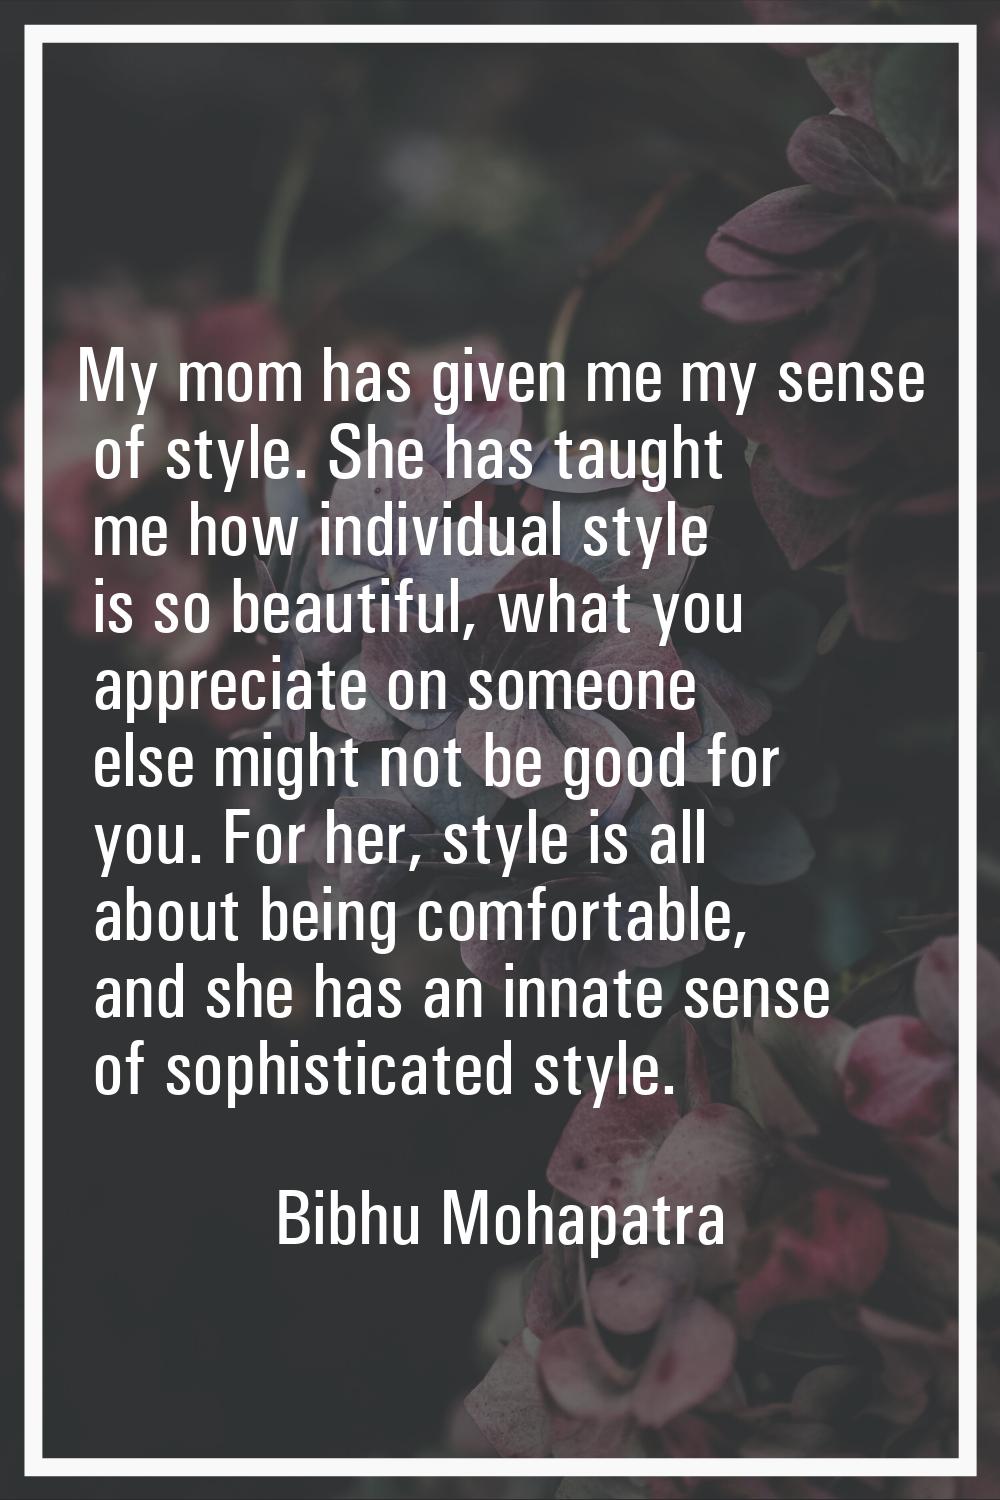 My mom has given me my sense of style. She has taught me how individual style is so beautiful, what